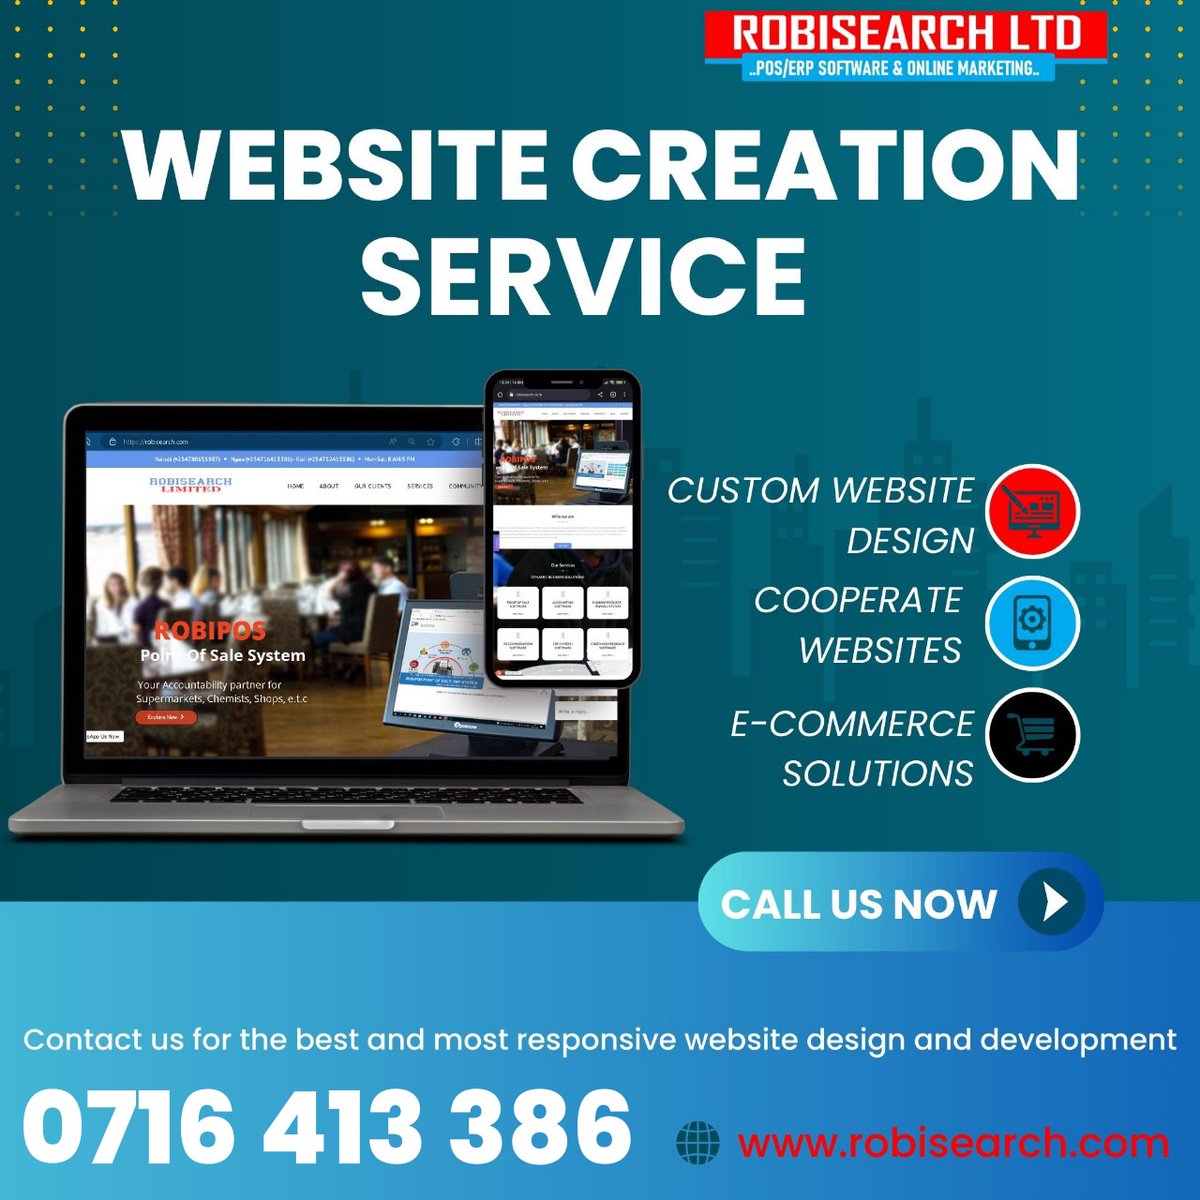 Many business owners ask, “Since I have a small business, we don’t sell anything online, do I need a website?”

The answer is YES! 📲0716413386

#CheWhu Cole Palmer Chelsea Tottenham Manchester United eTIMS Casemiro Interior Cabinet Secretary Arsenal Dandora Stadium Fulham Runda